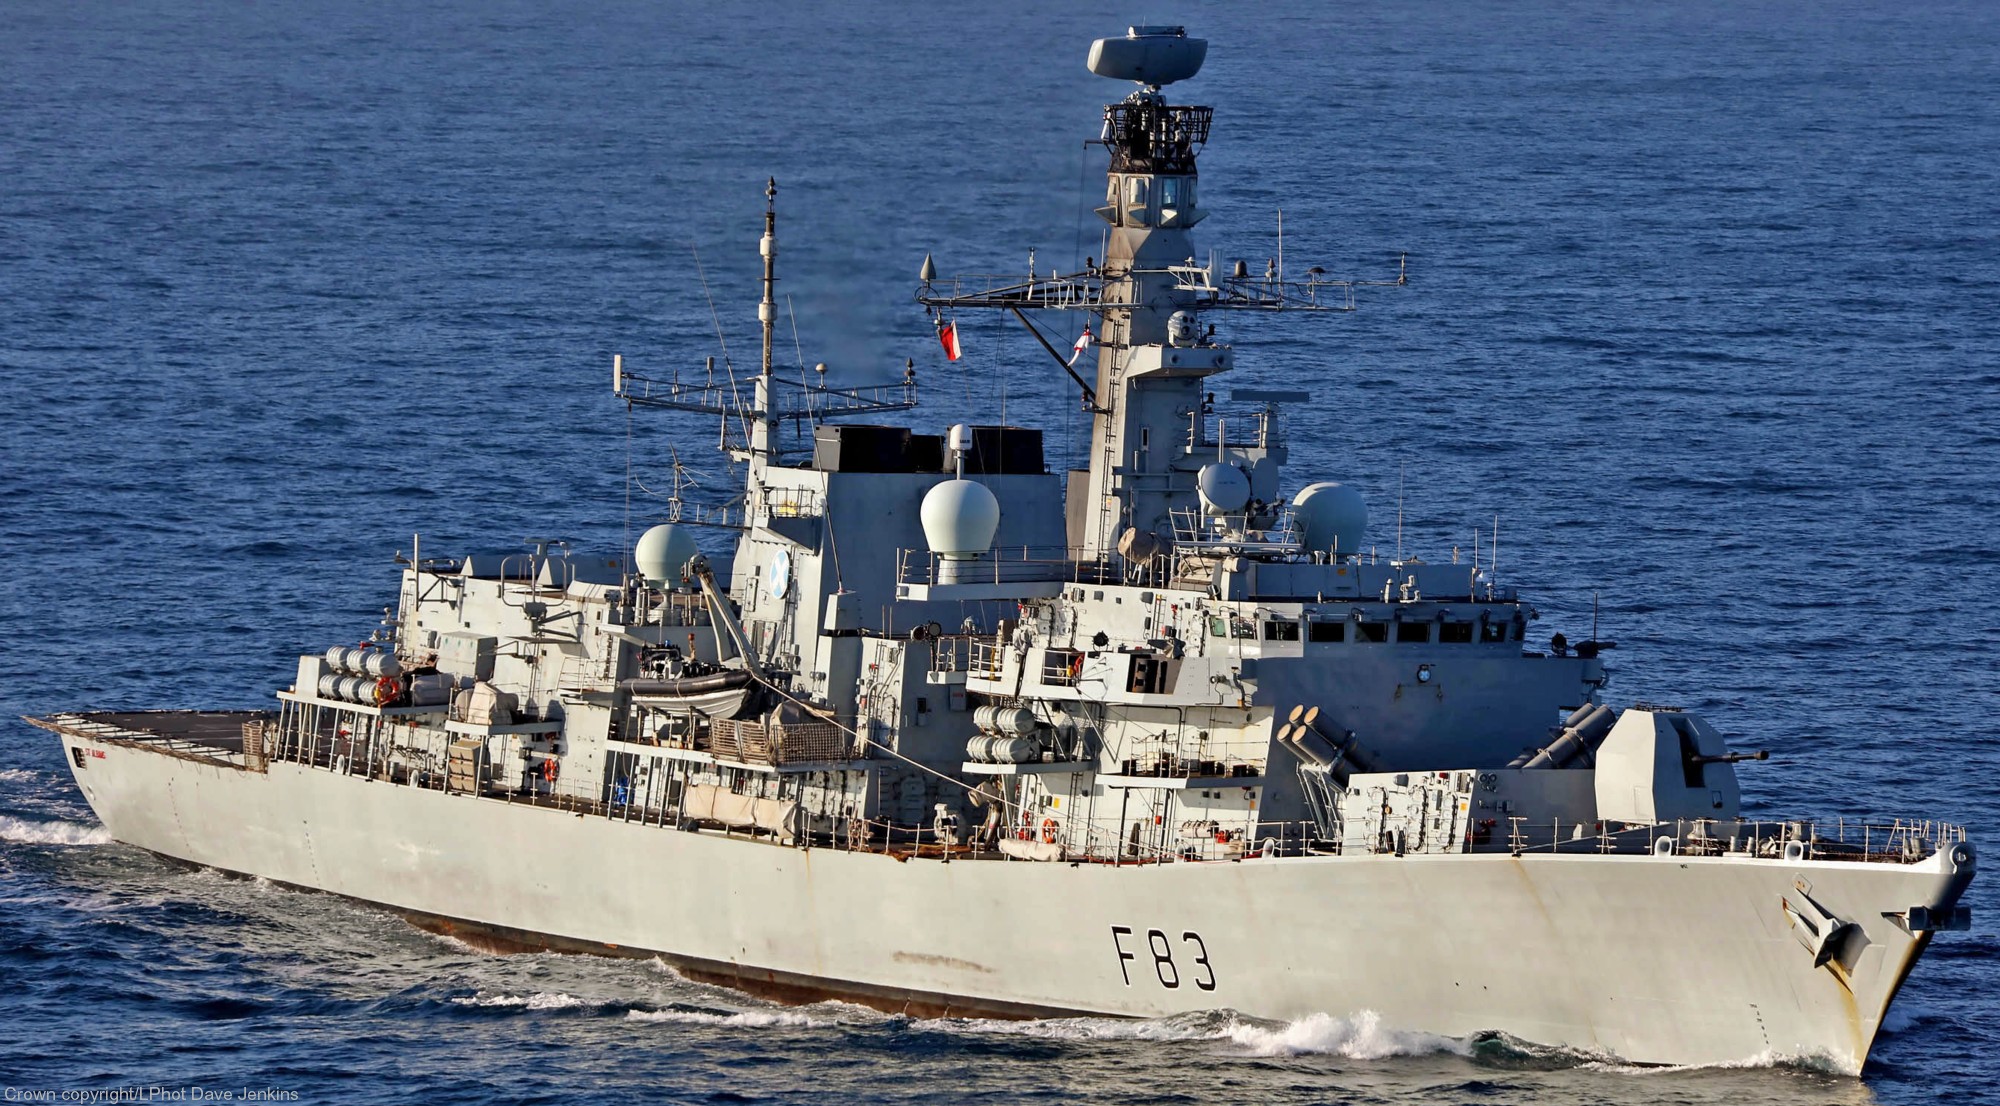 f-83 hms st. albans type 23 duke class guided missile frigate ffg royal navy 13x bae systems scotstoun